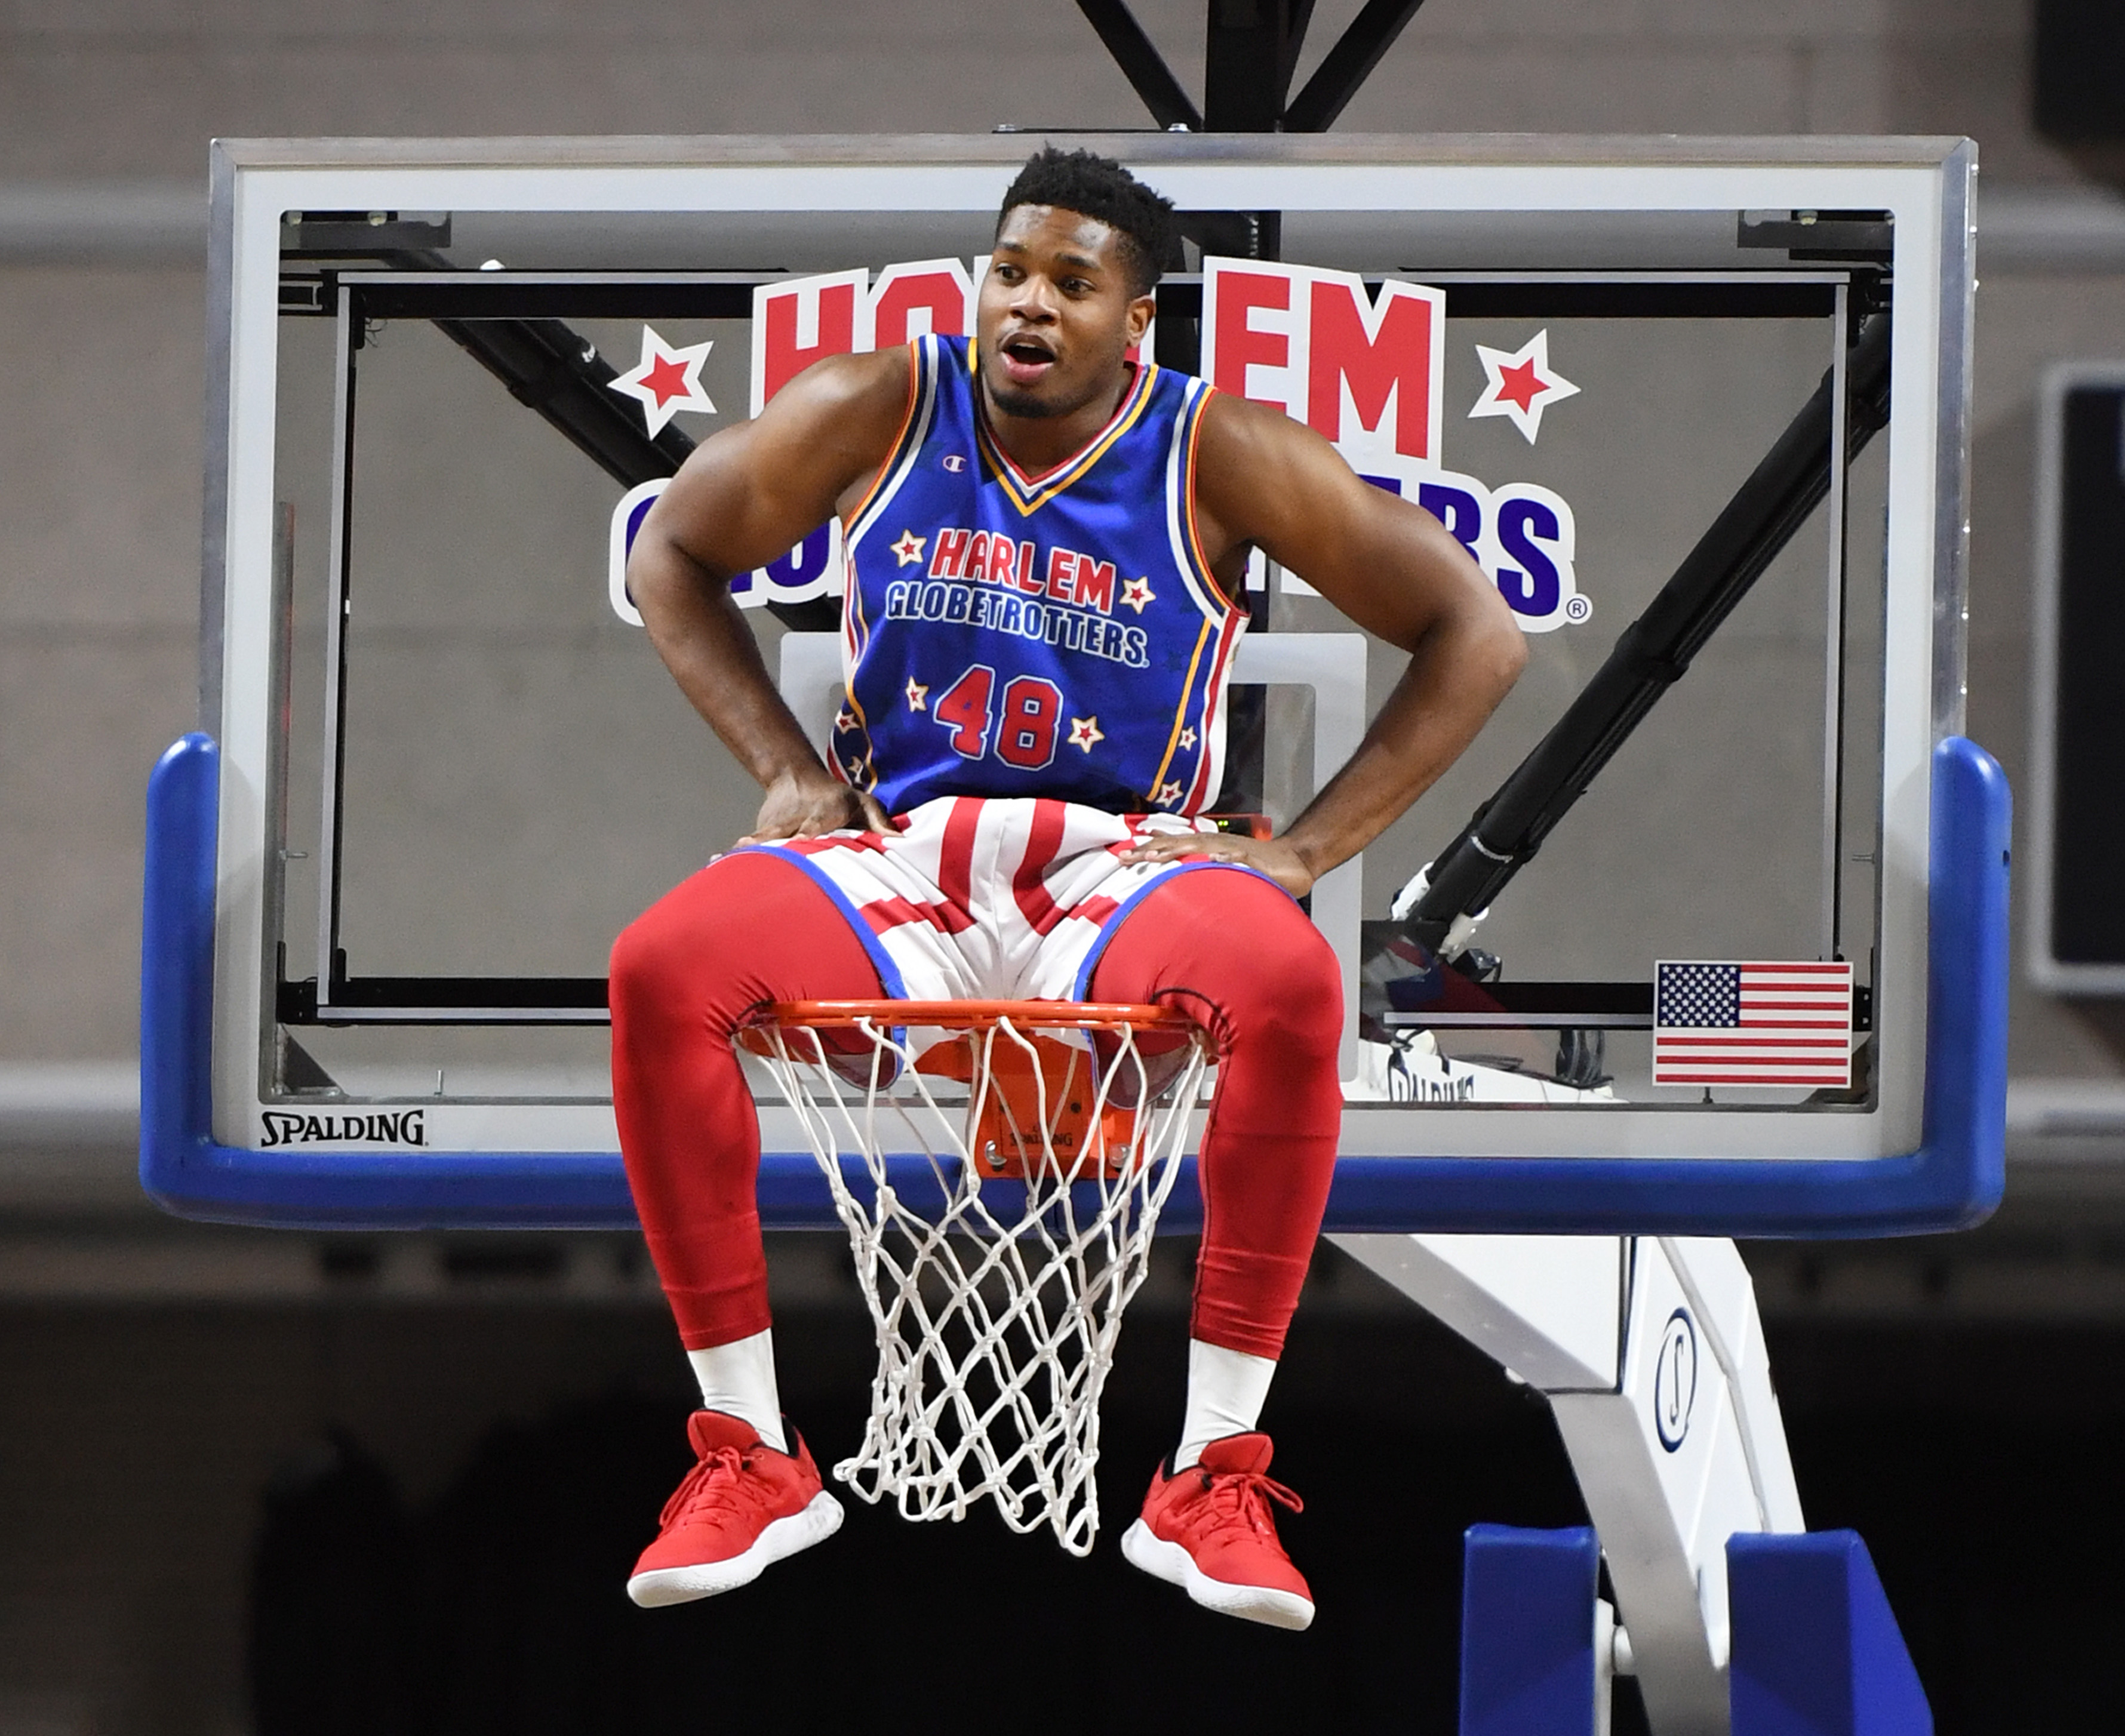 Antjuan "Clutch" Ball of the Harlem Globetrotters sits on the rim